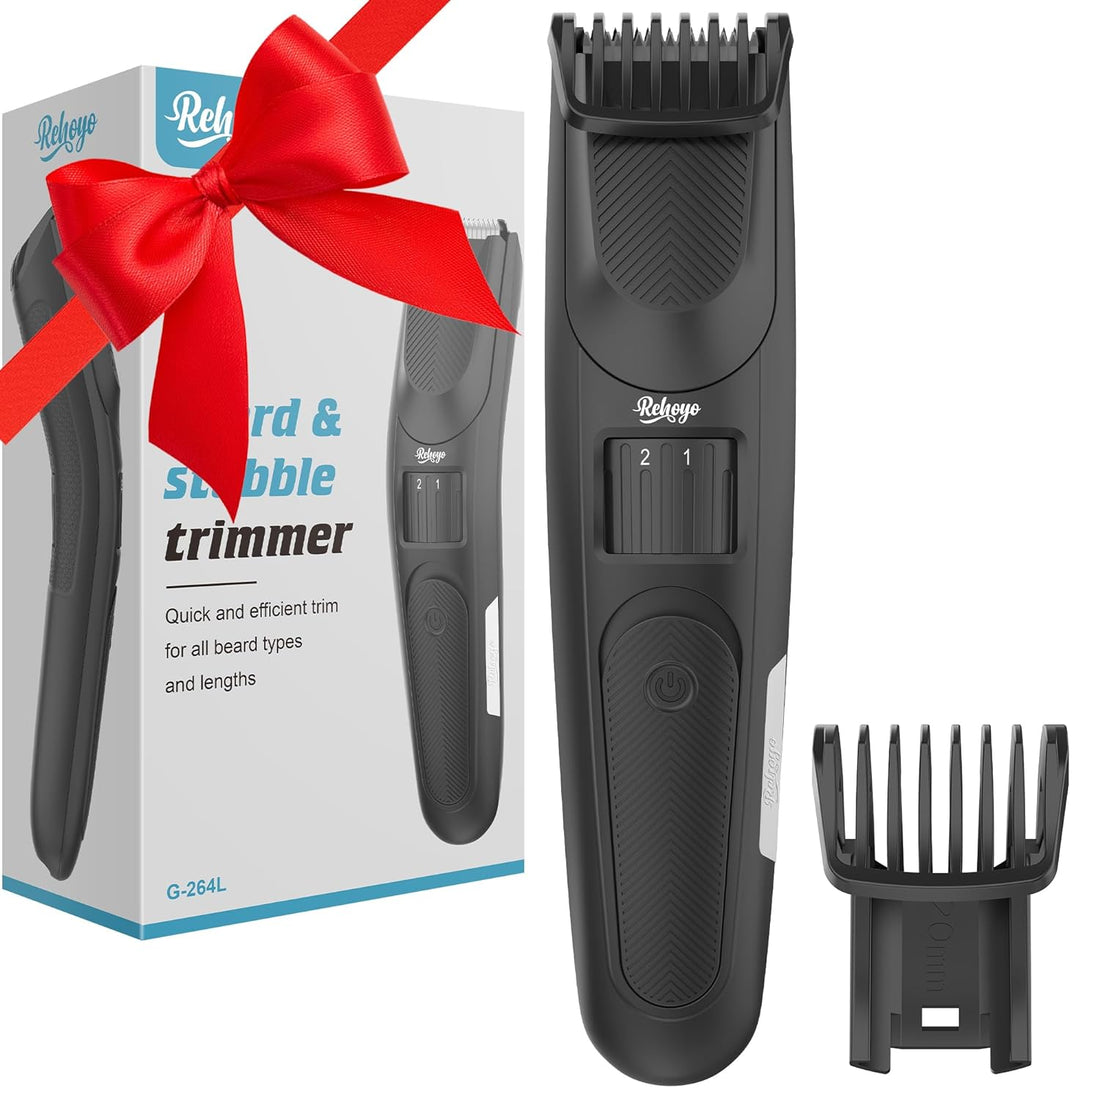 REHOYO Beard Trimmer for Men: Electric Cordless Hair Trimmer 40 Length and Style Settings with Adjustable Length Combs,Grooming Kit for Beard, Mustache,Sideburns and Stubble Rechargeable,Gift for Him